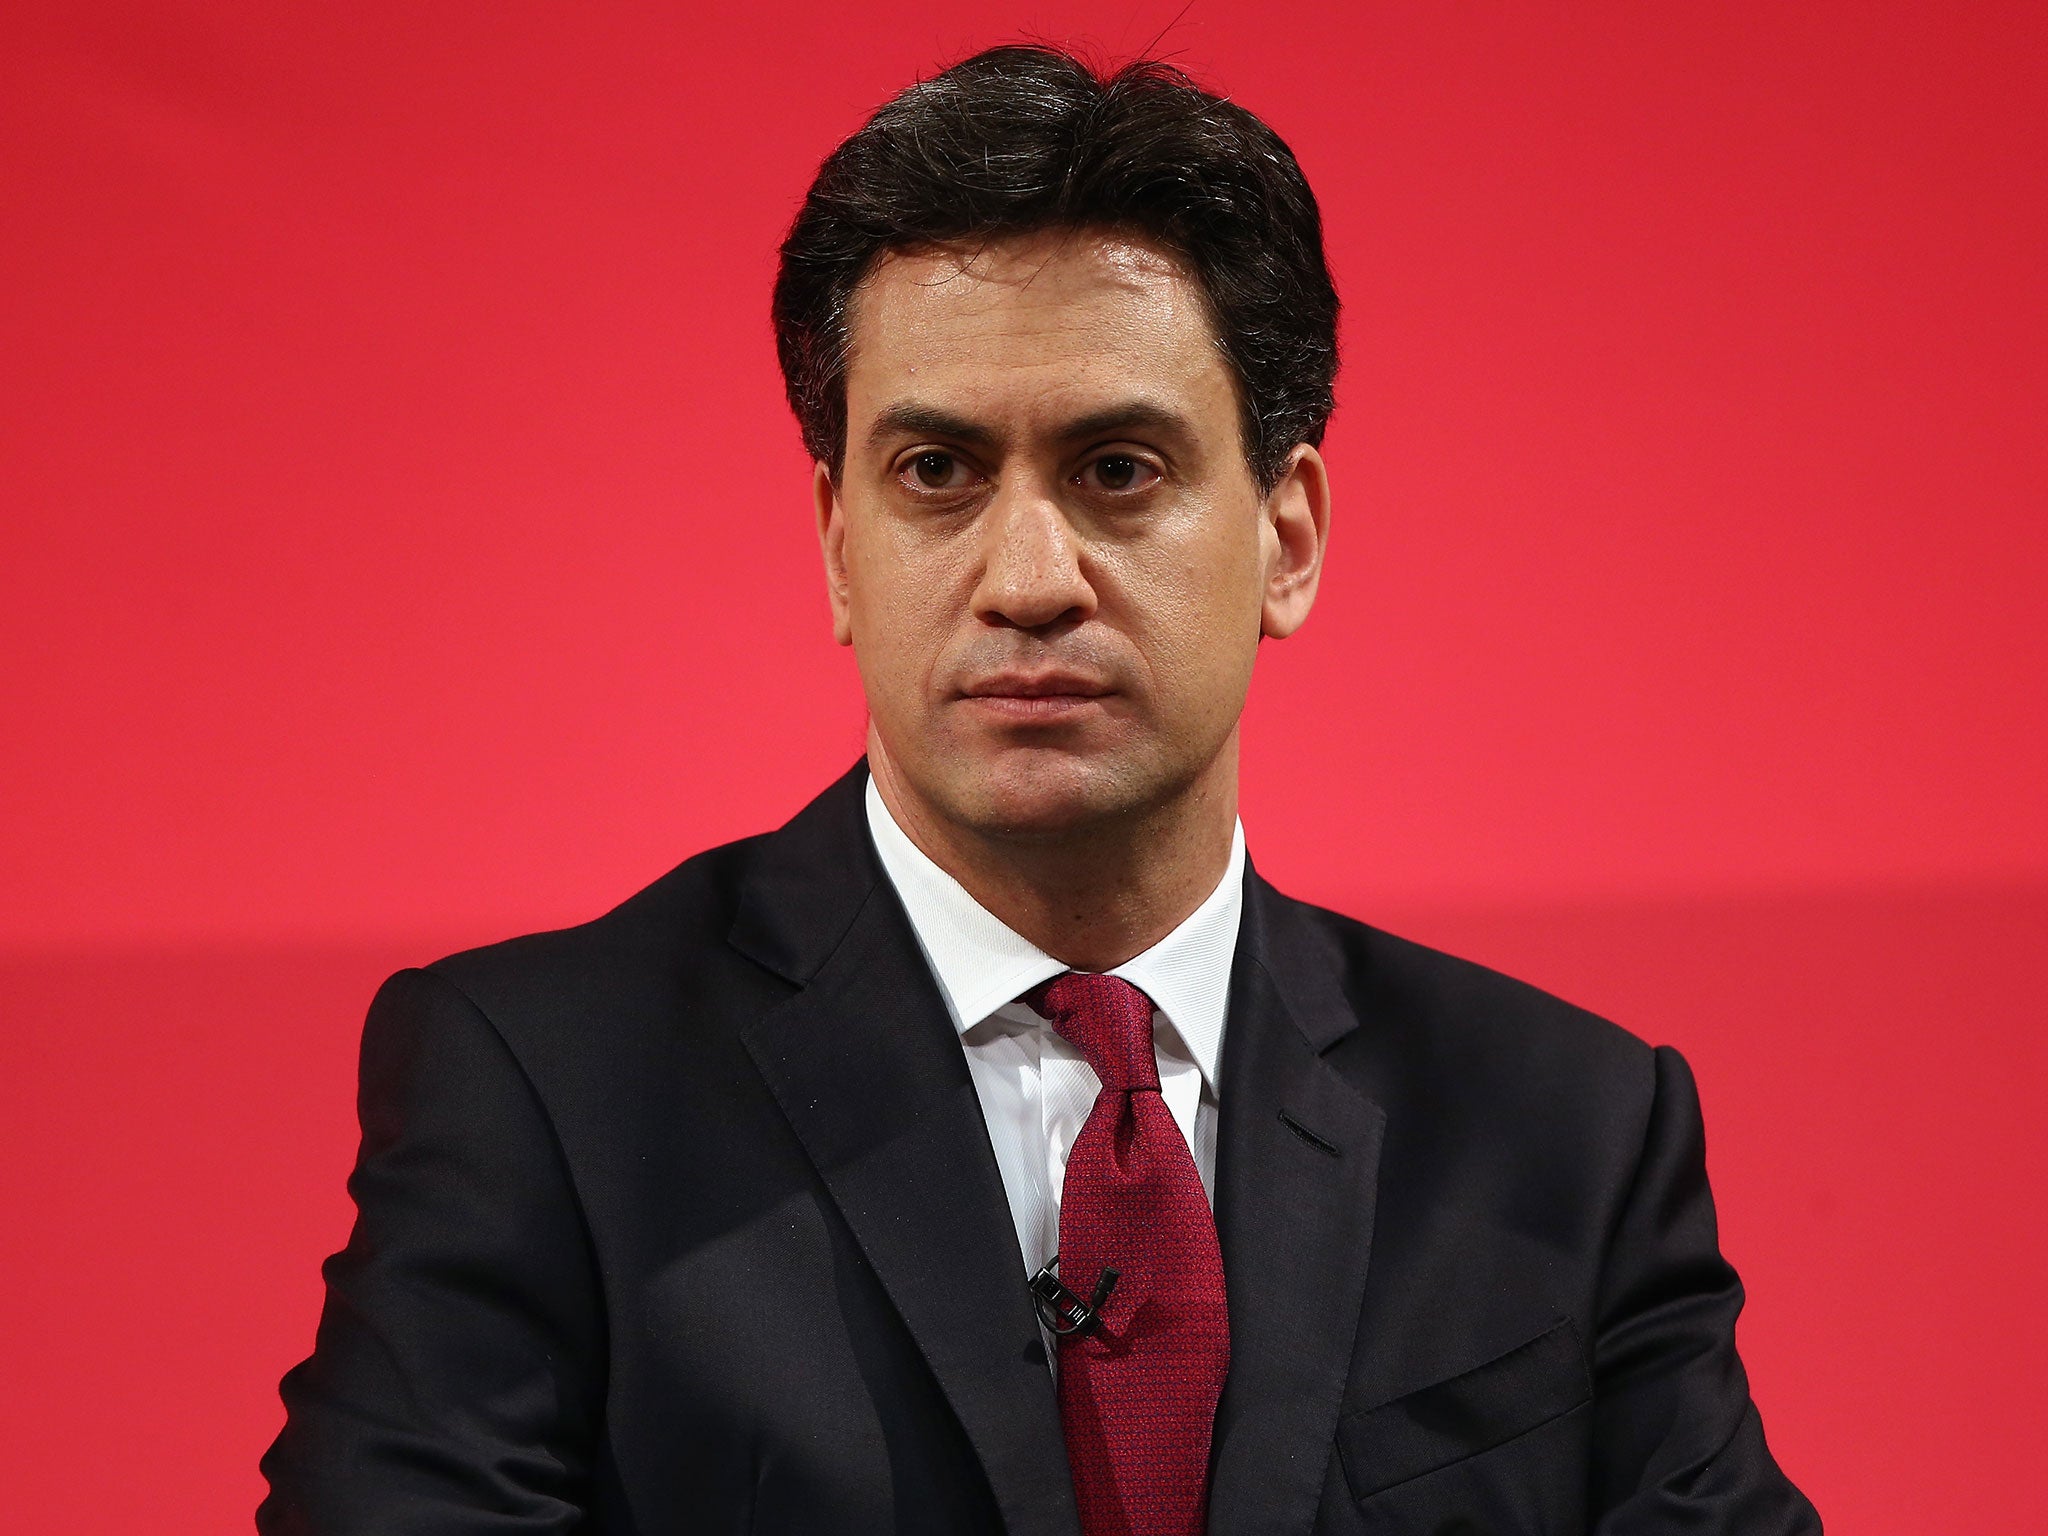 Ed Miliband was described as 'one of the worst leaders in Labour's history' by Simon Danczuk